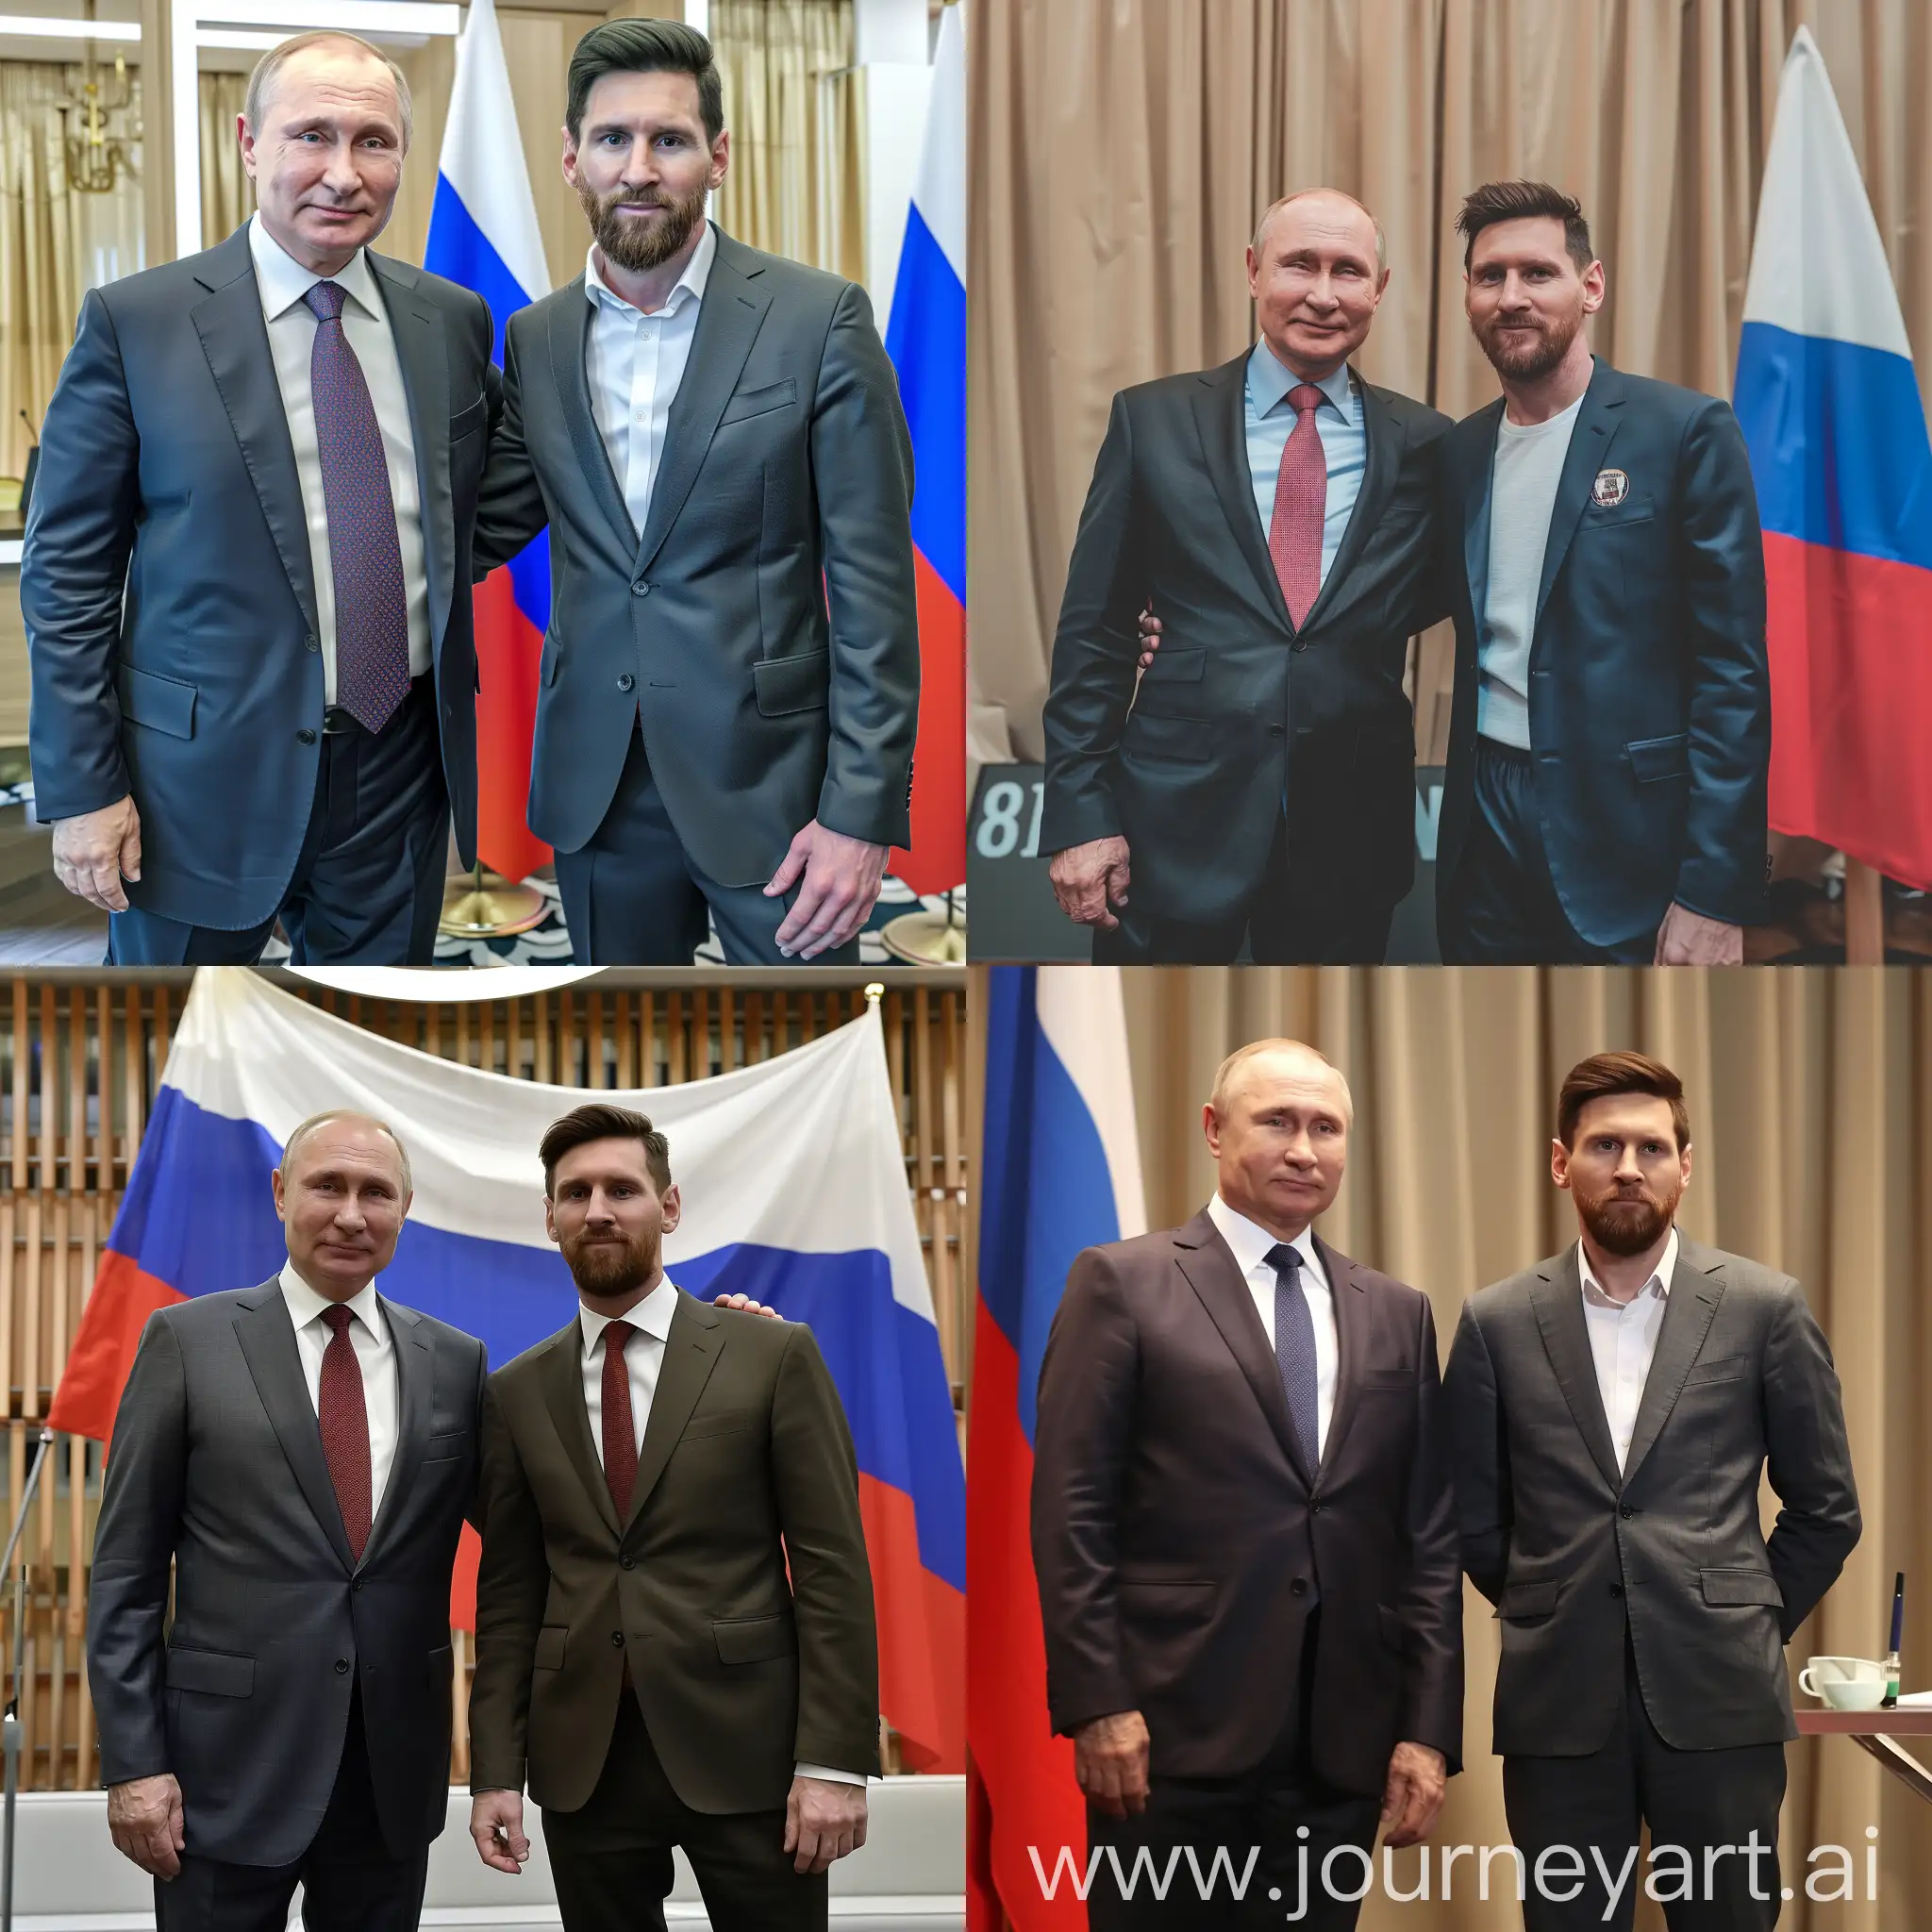 Vladimir-Putin-and-Lionel-Messi-Global-Leaders-in-the-Conference-Hall